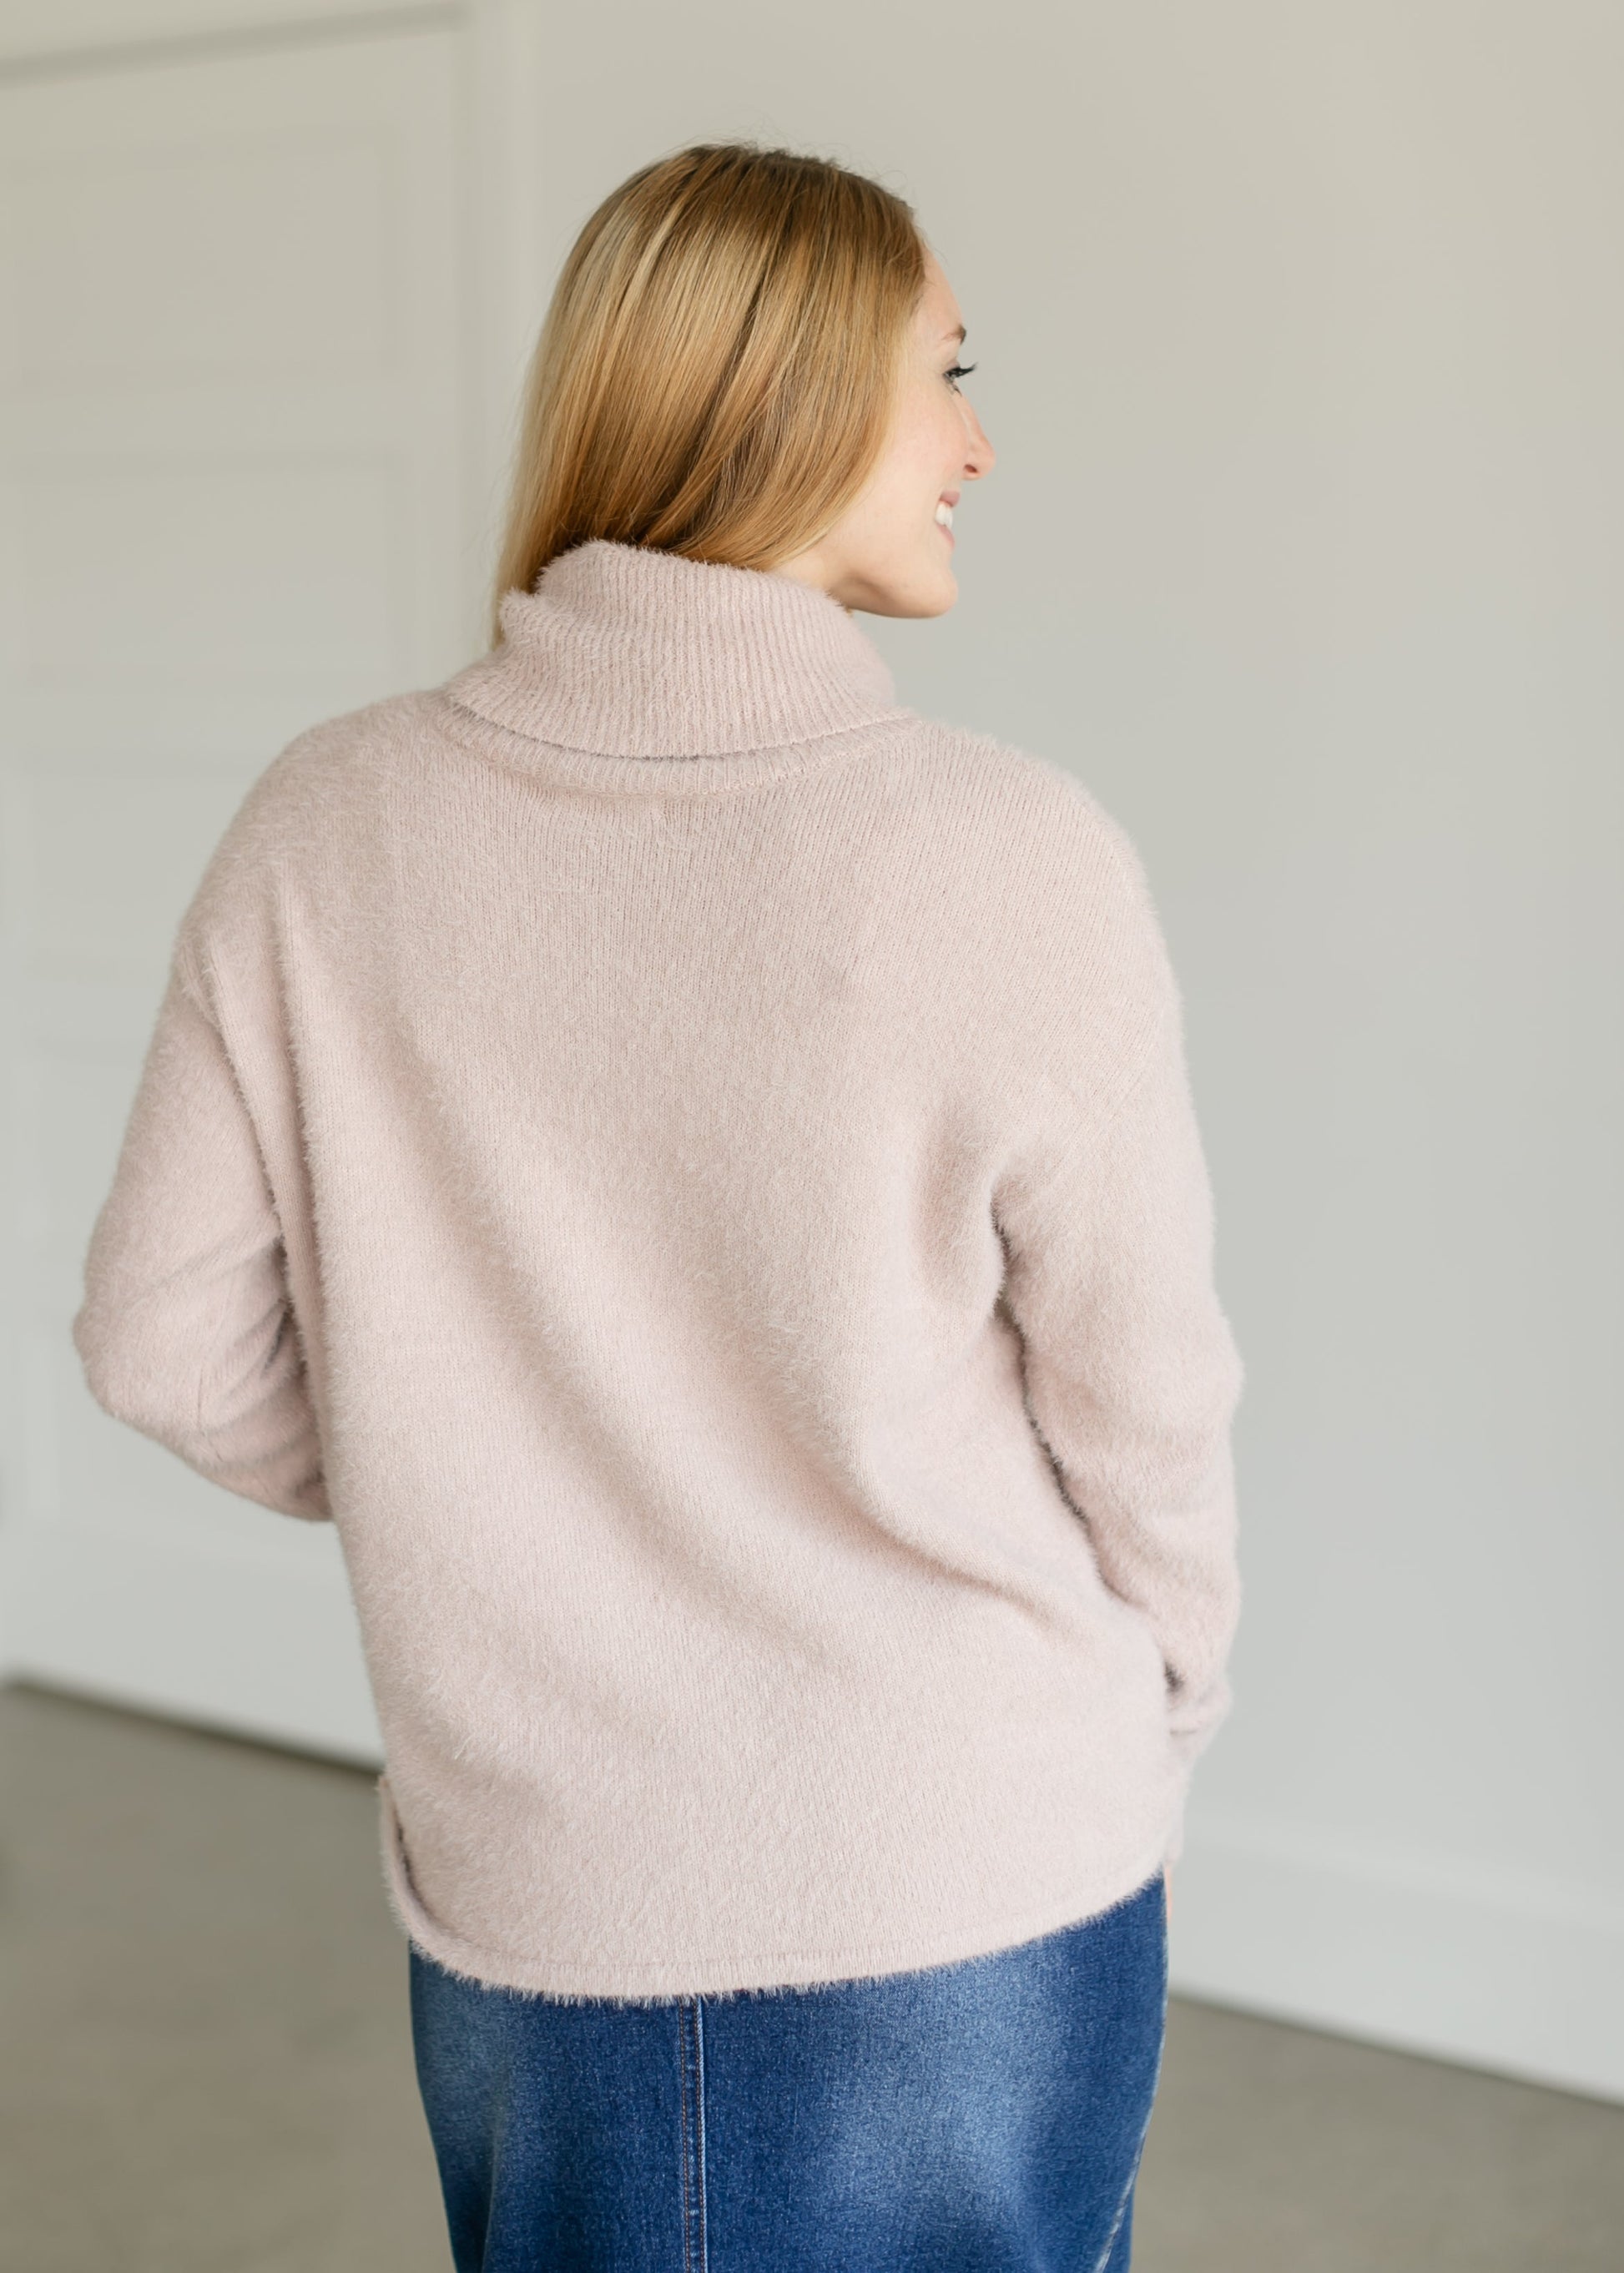 Fuzzy Turtleneck Pullover Sweater FF Tops